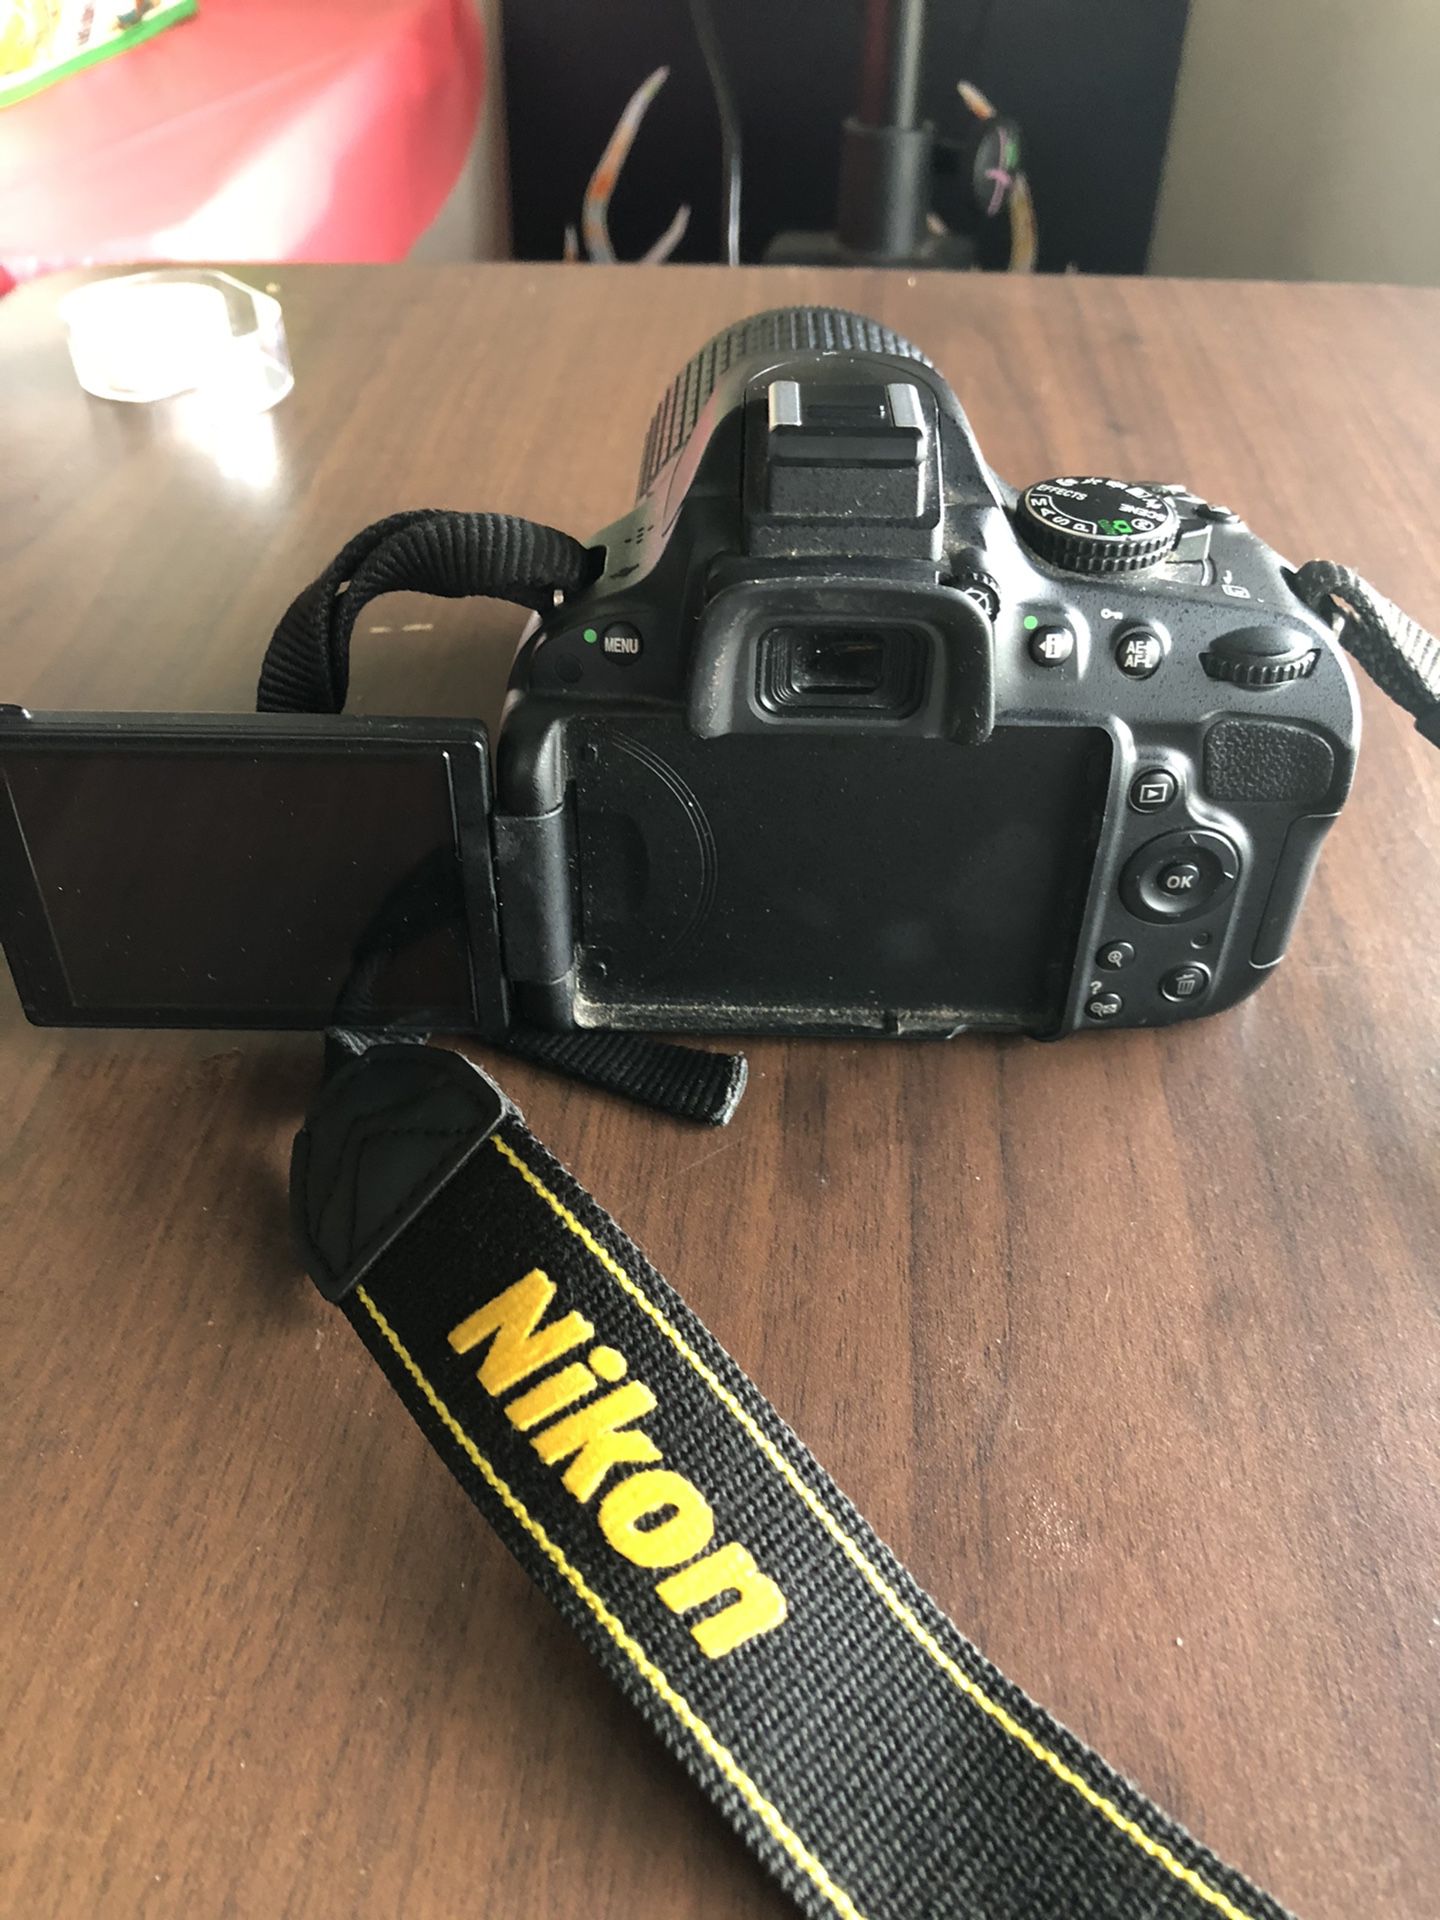 Nikon d5100 dslr camera with dx 55-200mm lens. With video